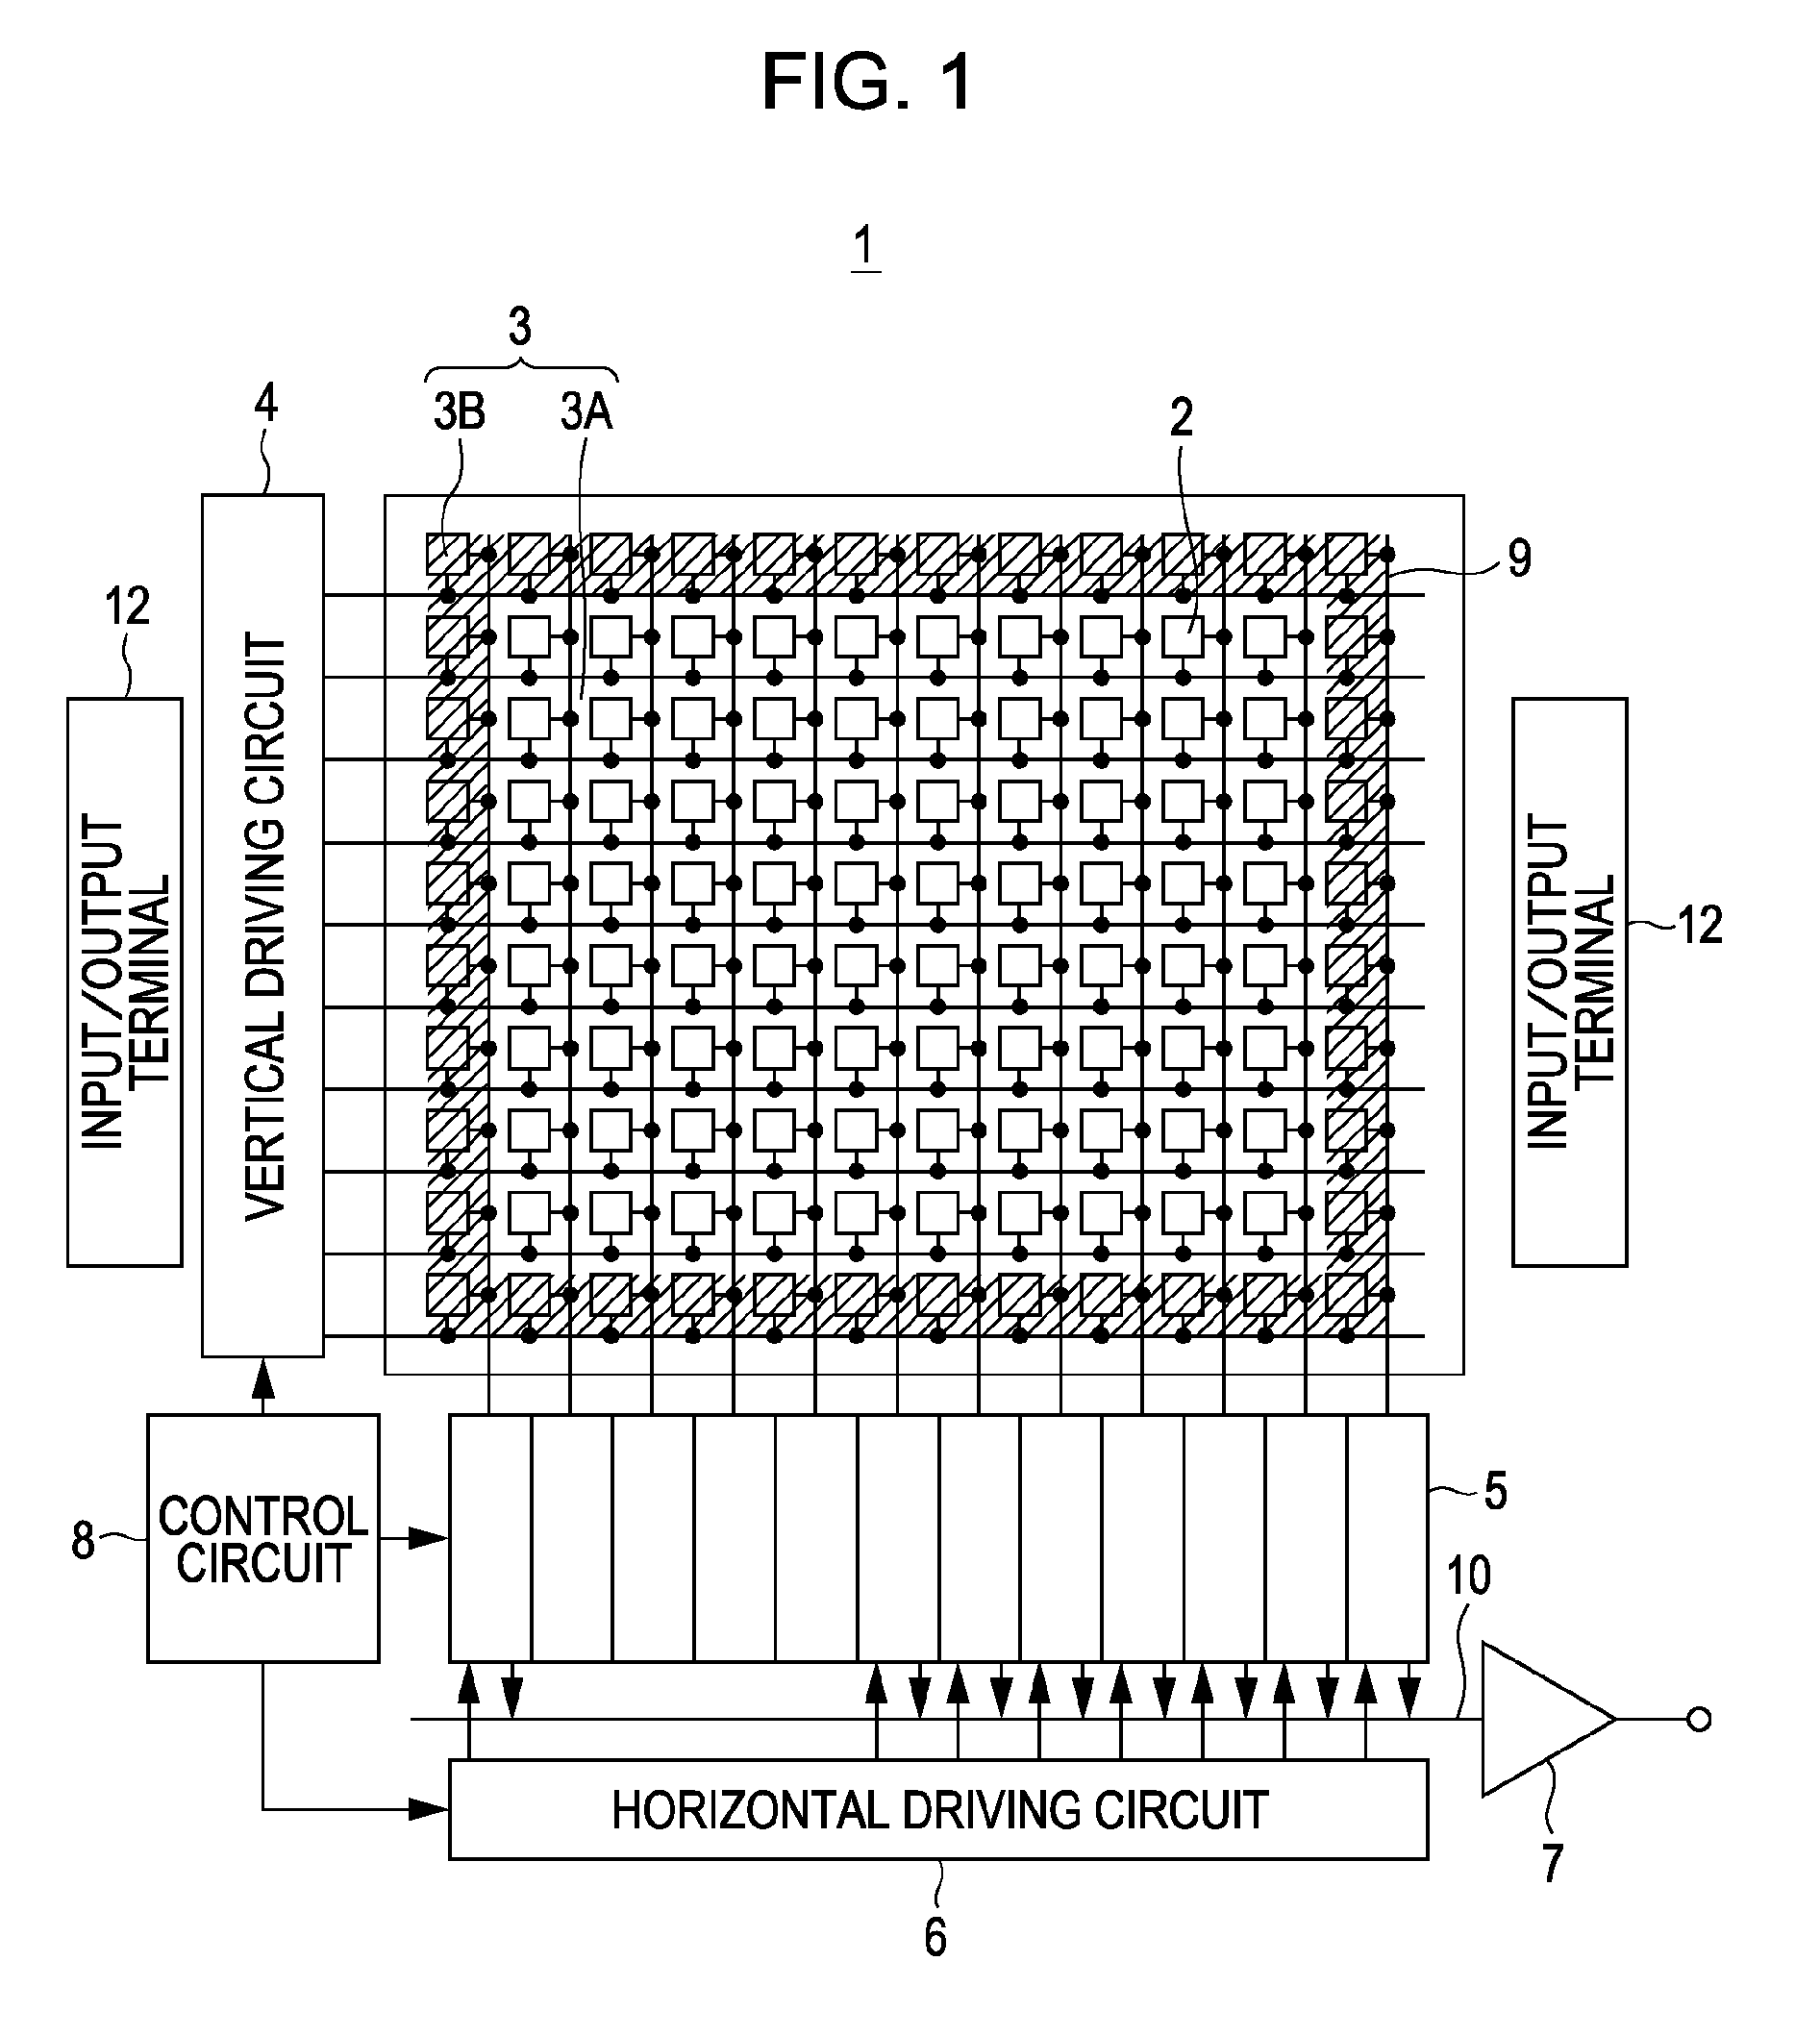 Solid-state imaging device, method for manufacturing the same, and electronic apparatus